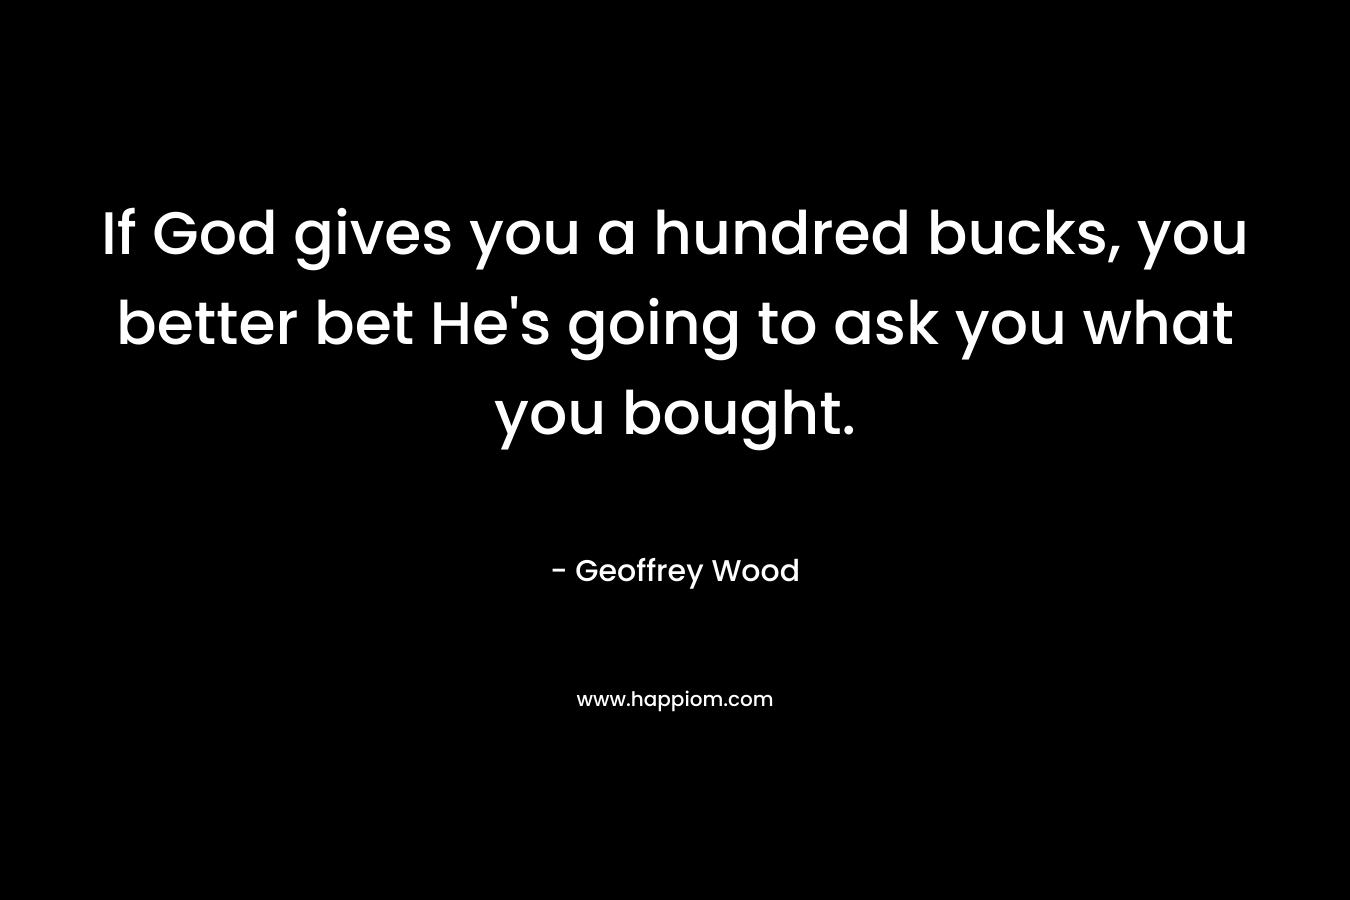 If God gives you a hundred bucks, you better bet He's going to ask you what you bought.